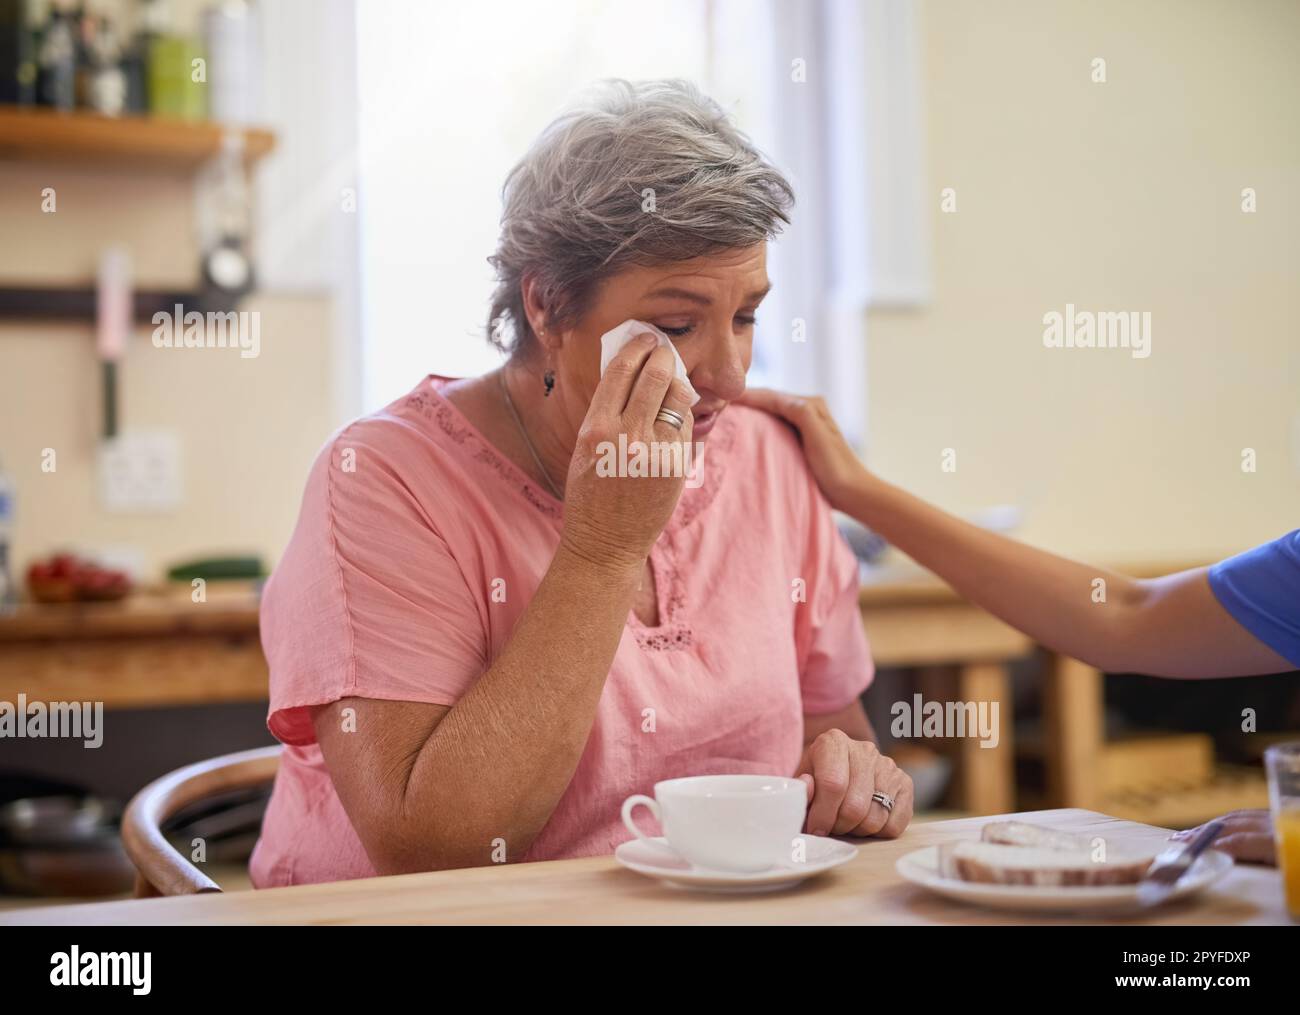 Feeling overwhelmed with grief and sorrow. a caregiver consoling a senior patient in a nursing home. Stock Photo